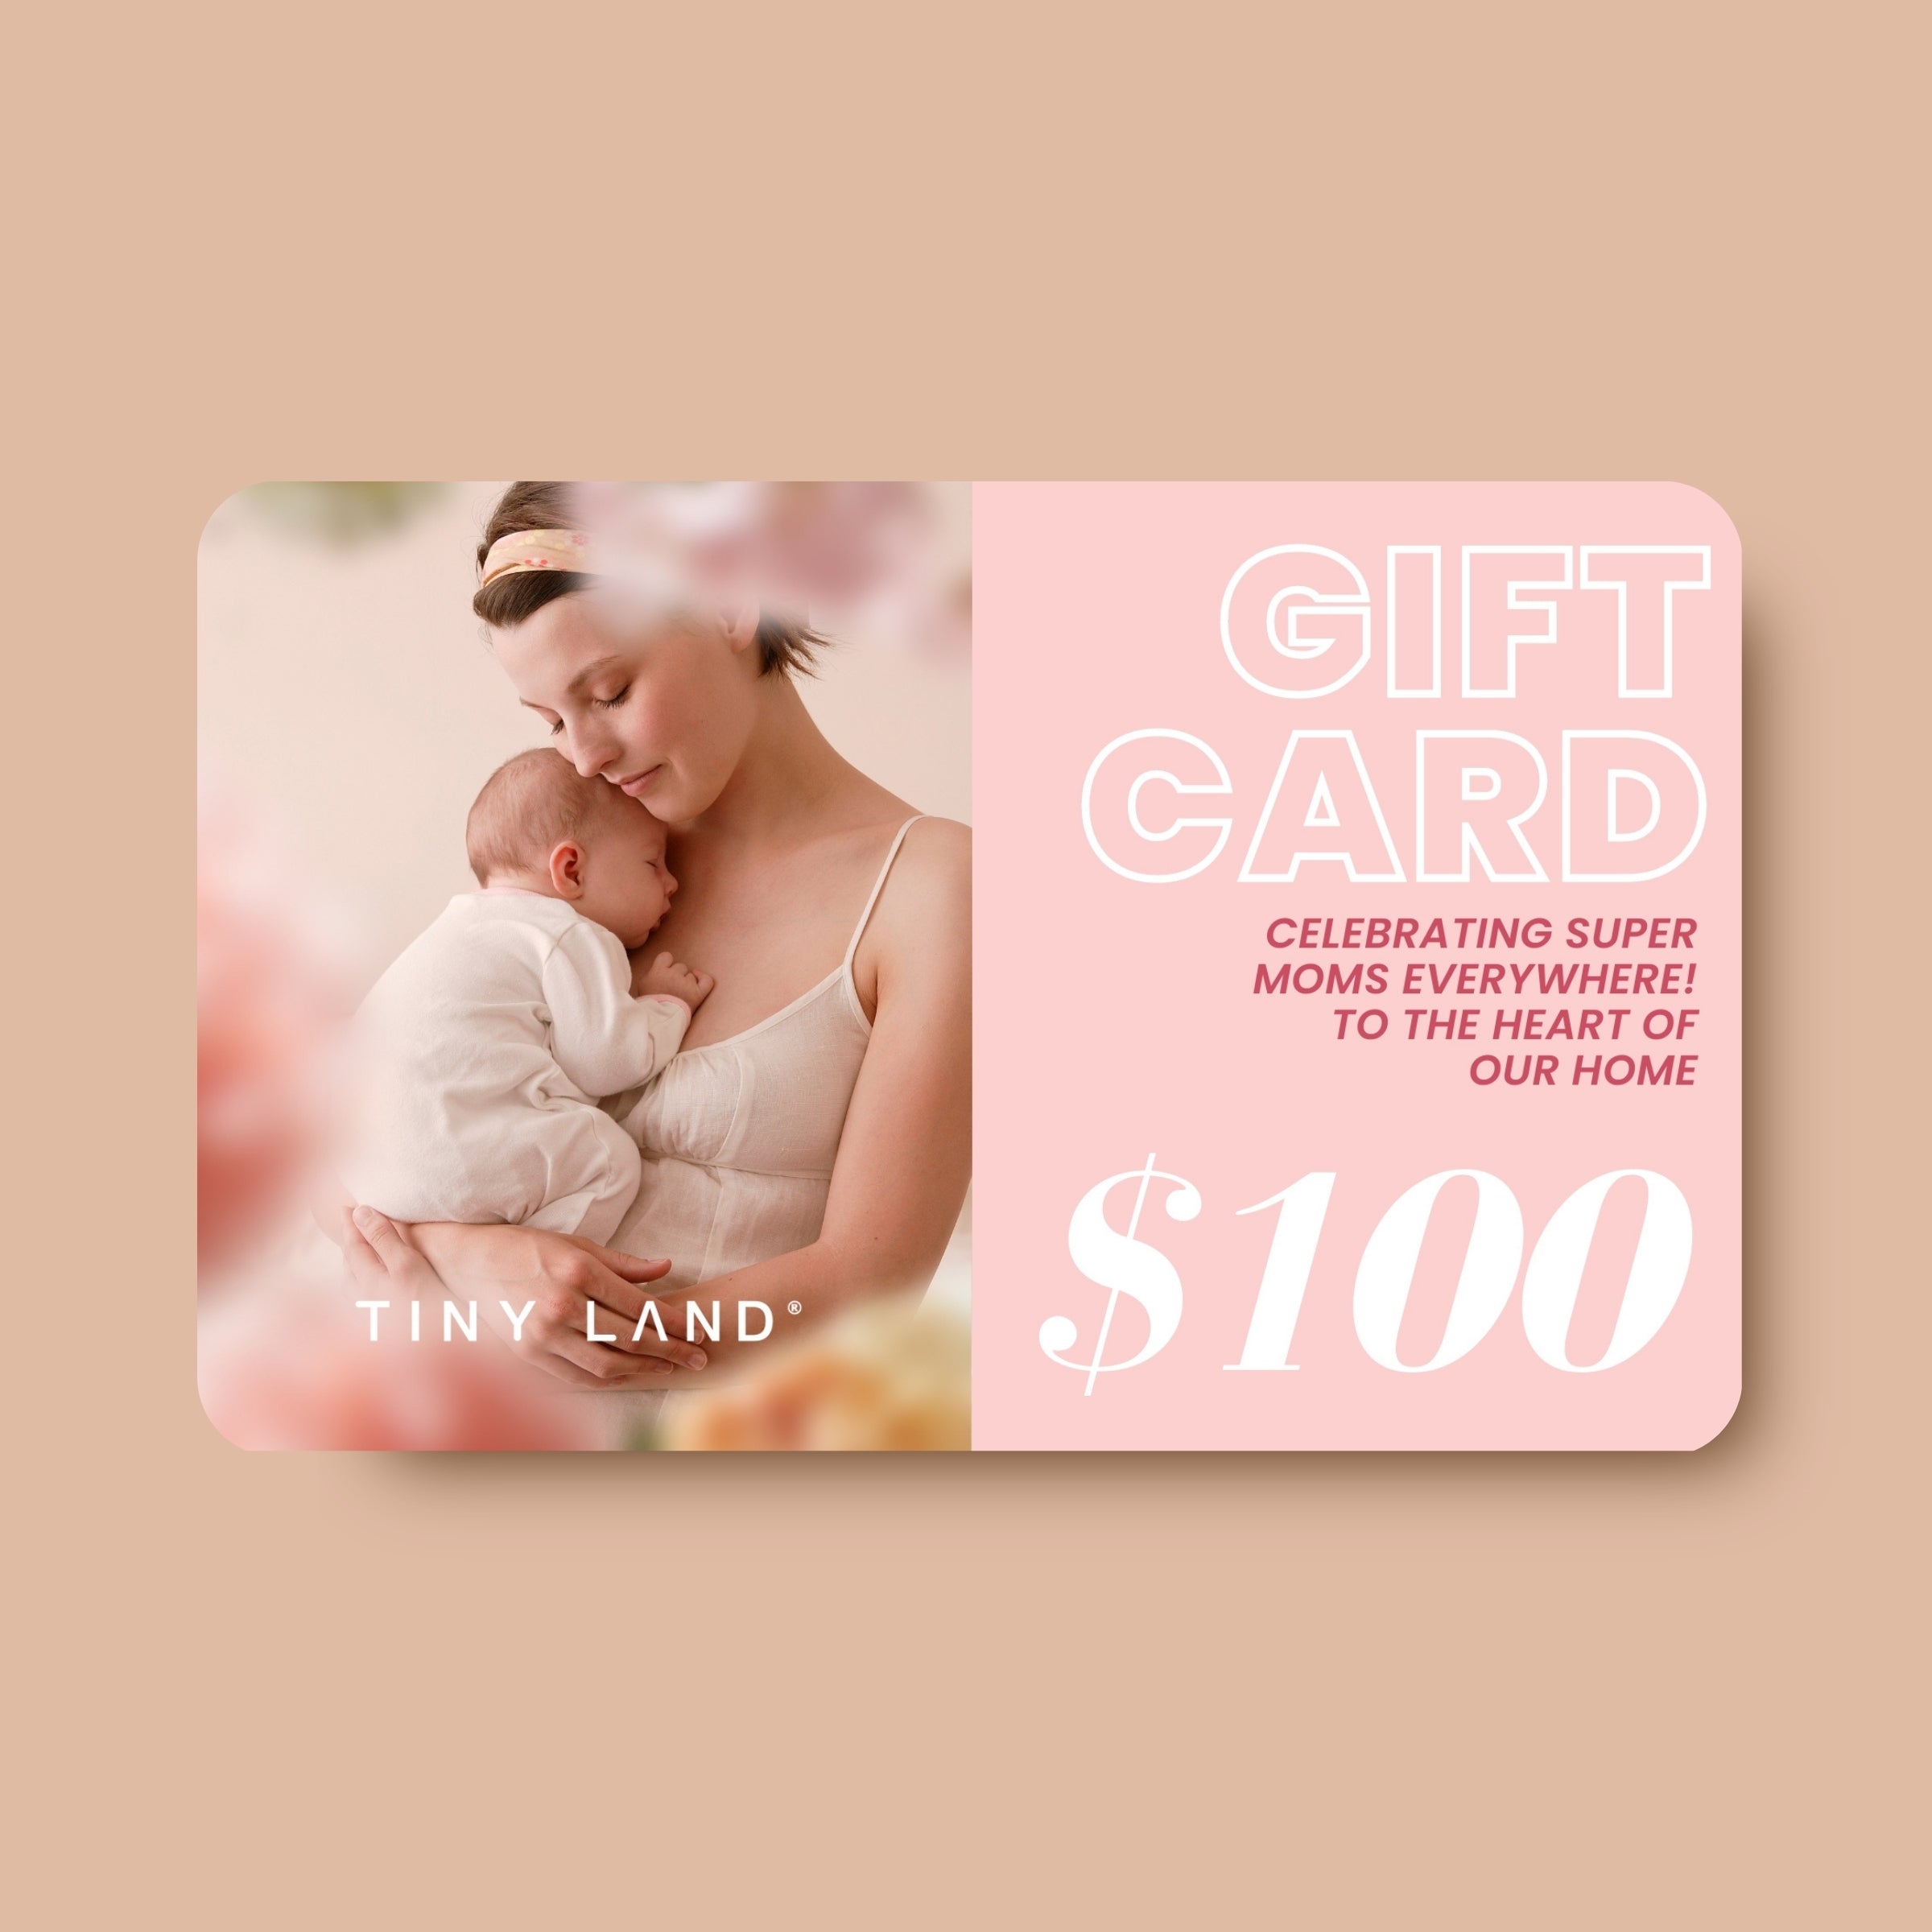 Mother's Day Gidtcard $100